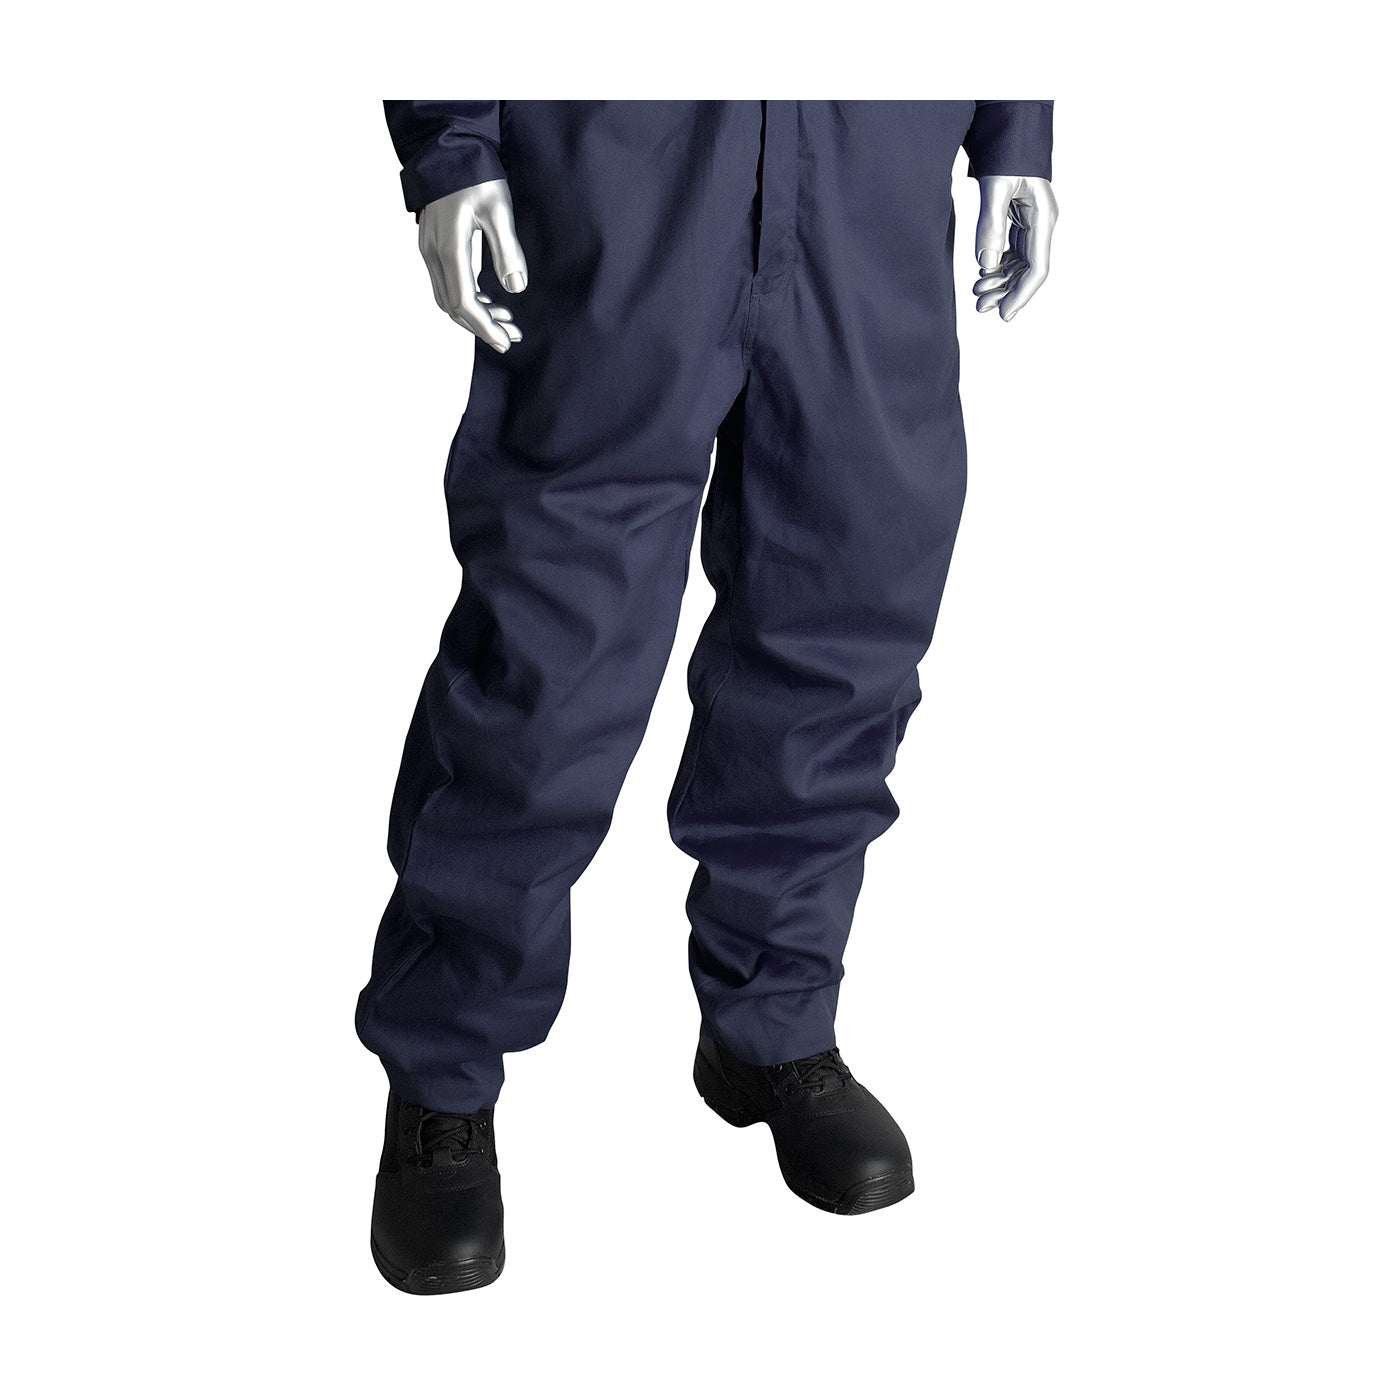 PIP 385-FRSC-NV/S AR/FR Dual Certified Coverall with Zipper Closure - 9.2 Cal/cm2